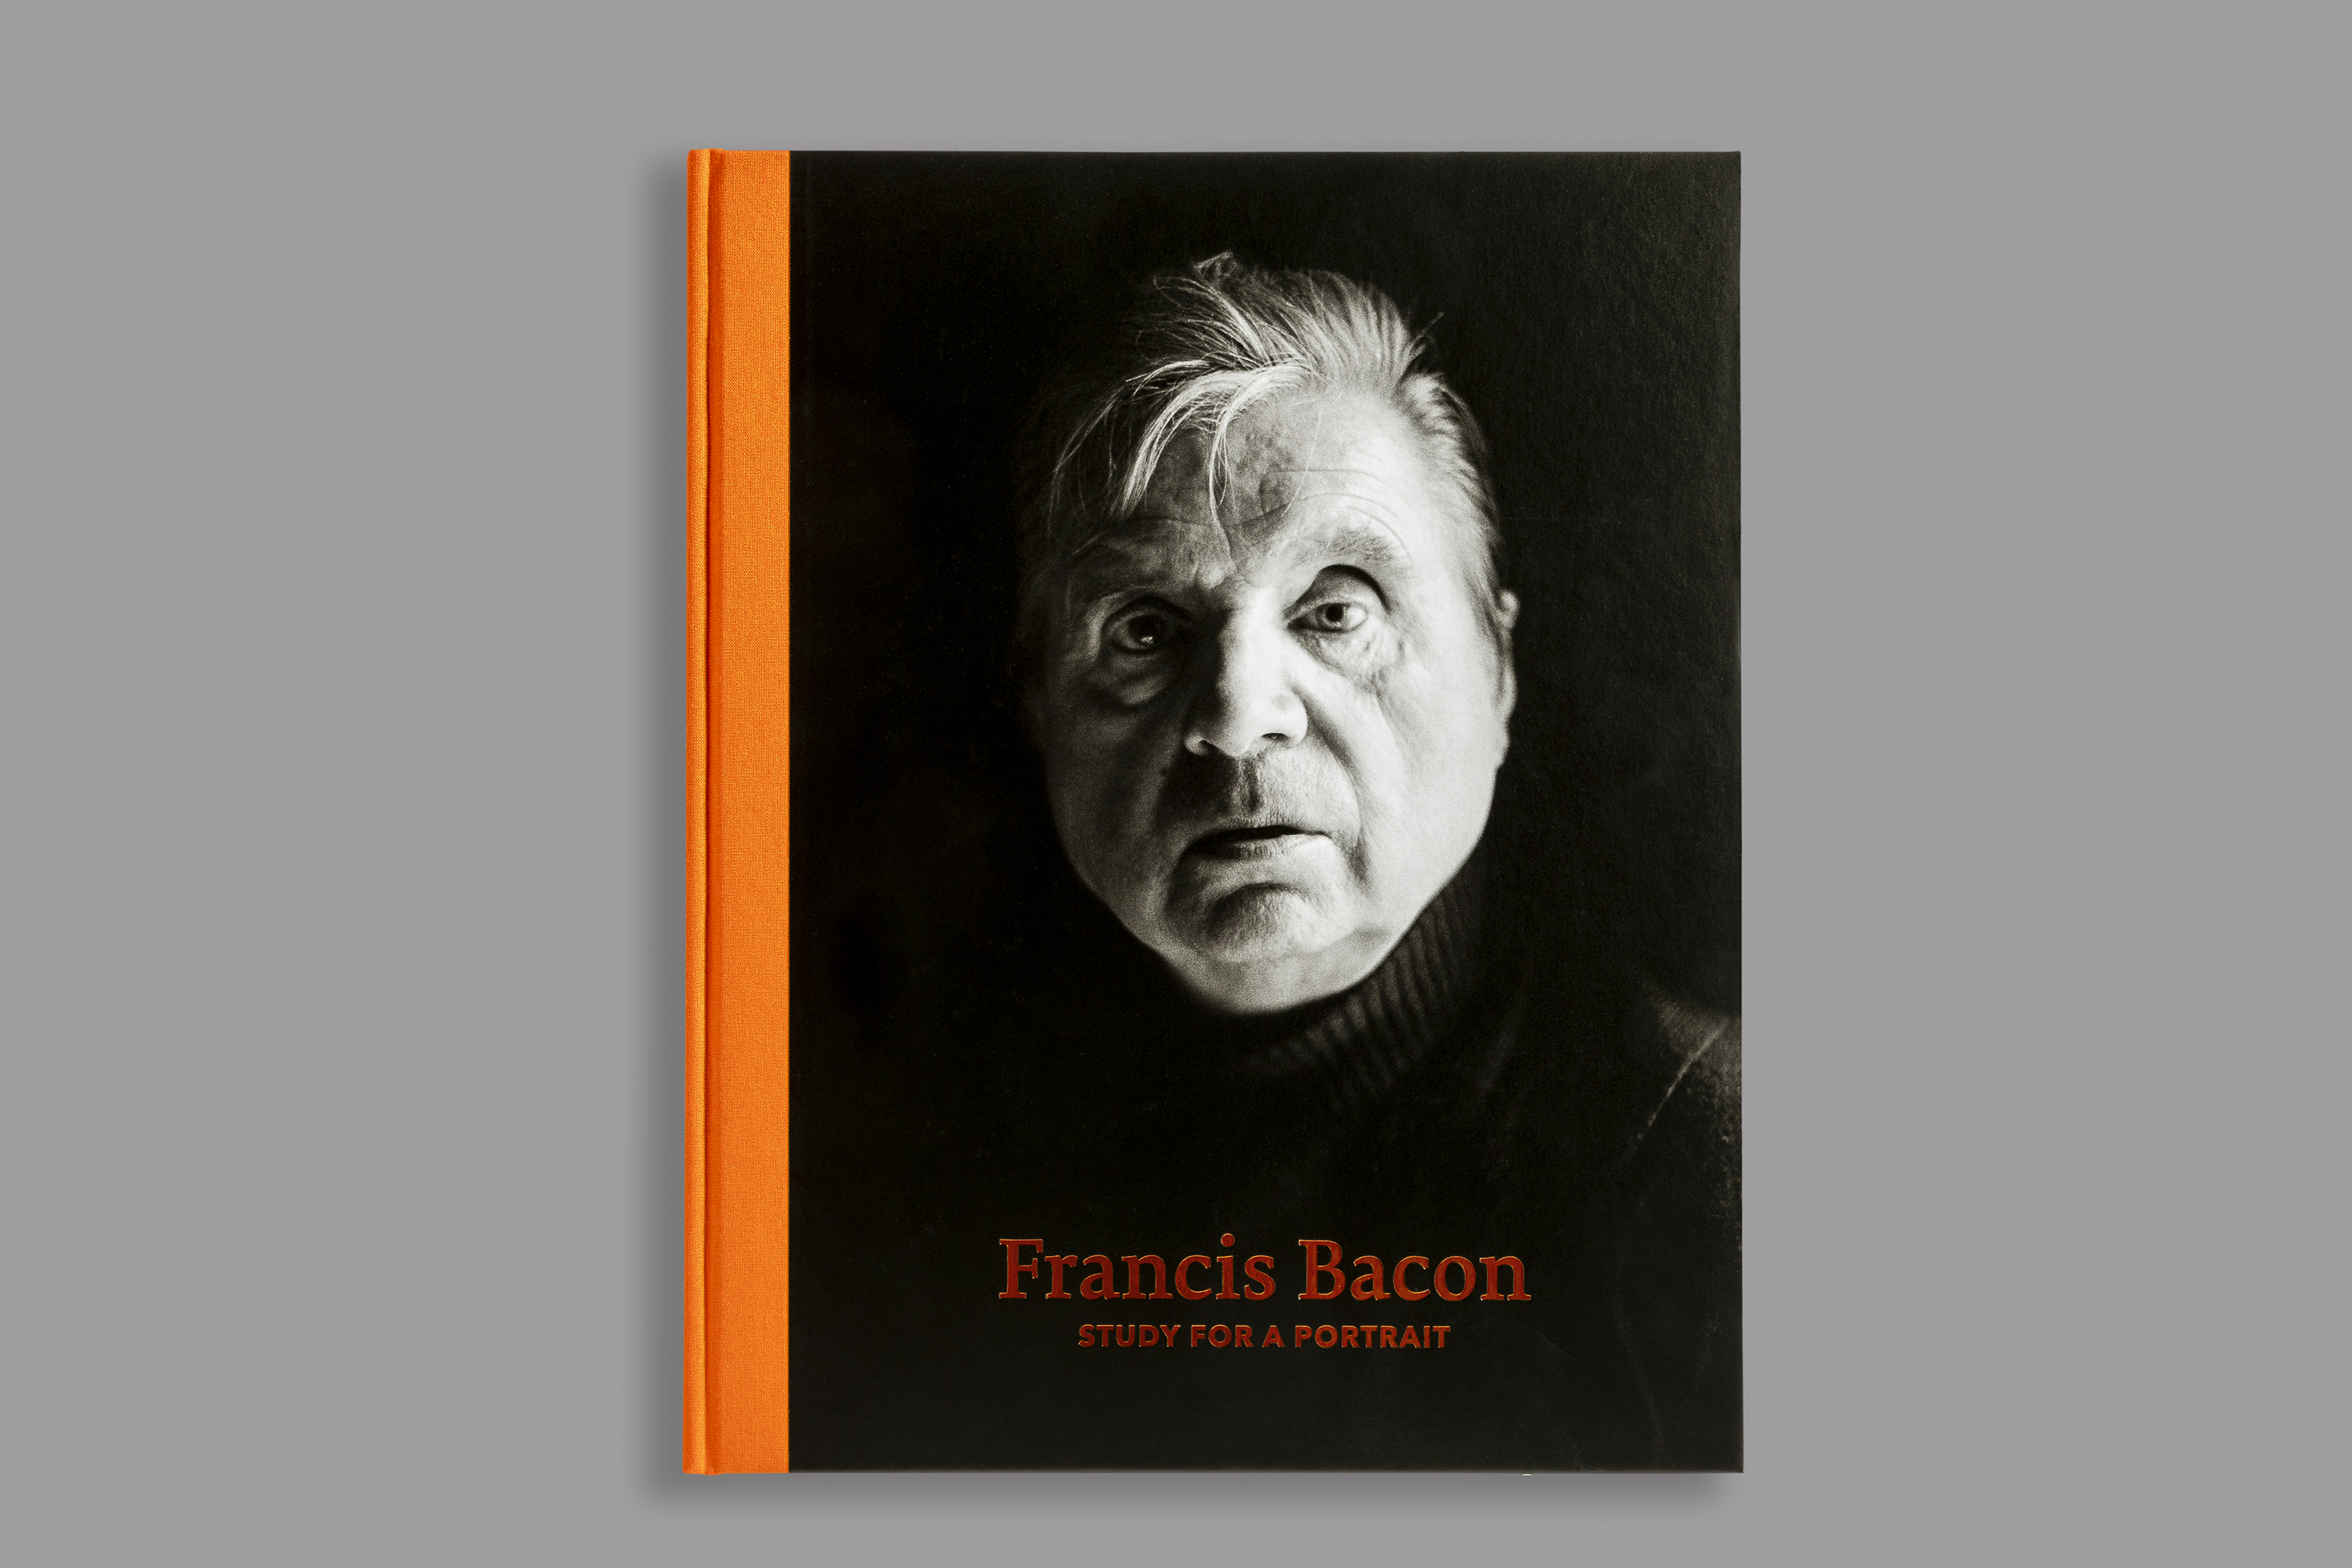 Francis Bacon: Study for a Portrait, 2019. © The Francis Bacon MB Art Foundation, Monaco, 2019. All rights reserved.